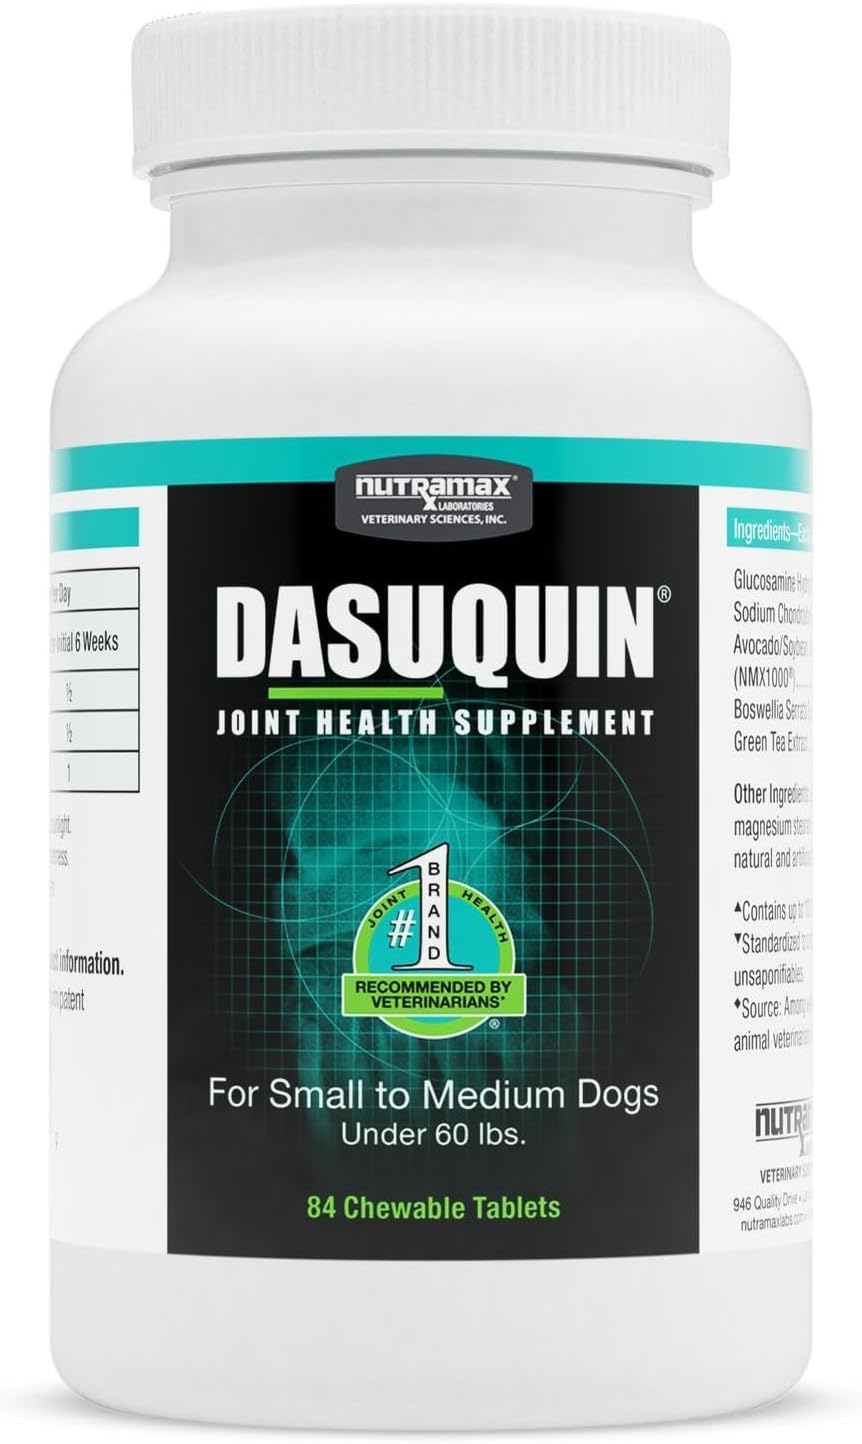 Nutramax Dasuquin Joint Health Supplement for Small to Medium Dogs - With Glucosamine, Chondroitin, ASU, Boswellia Serrata Extract, Green Tea Extract, 84 Chewable Tablets (White)